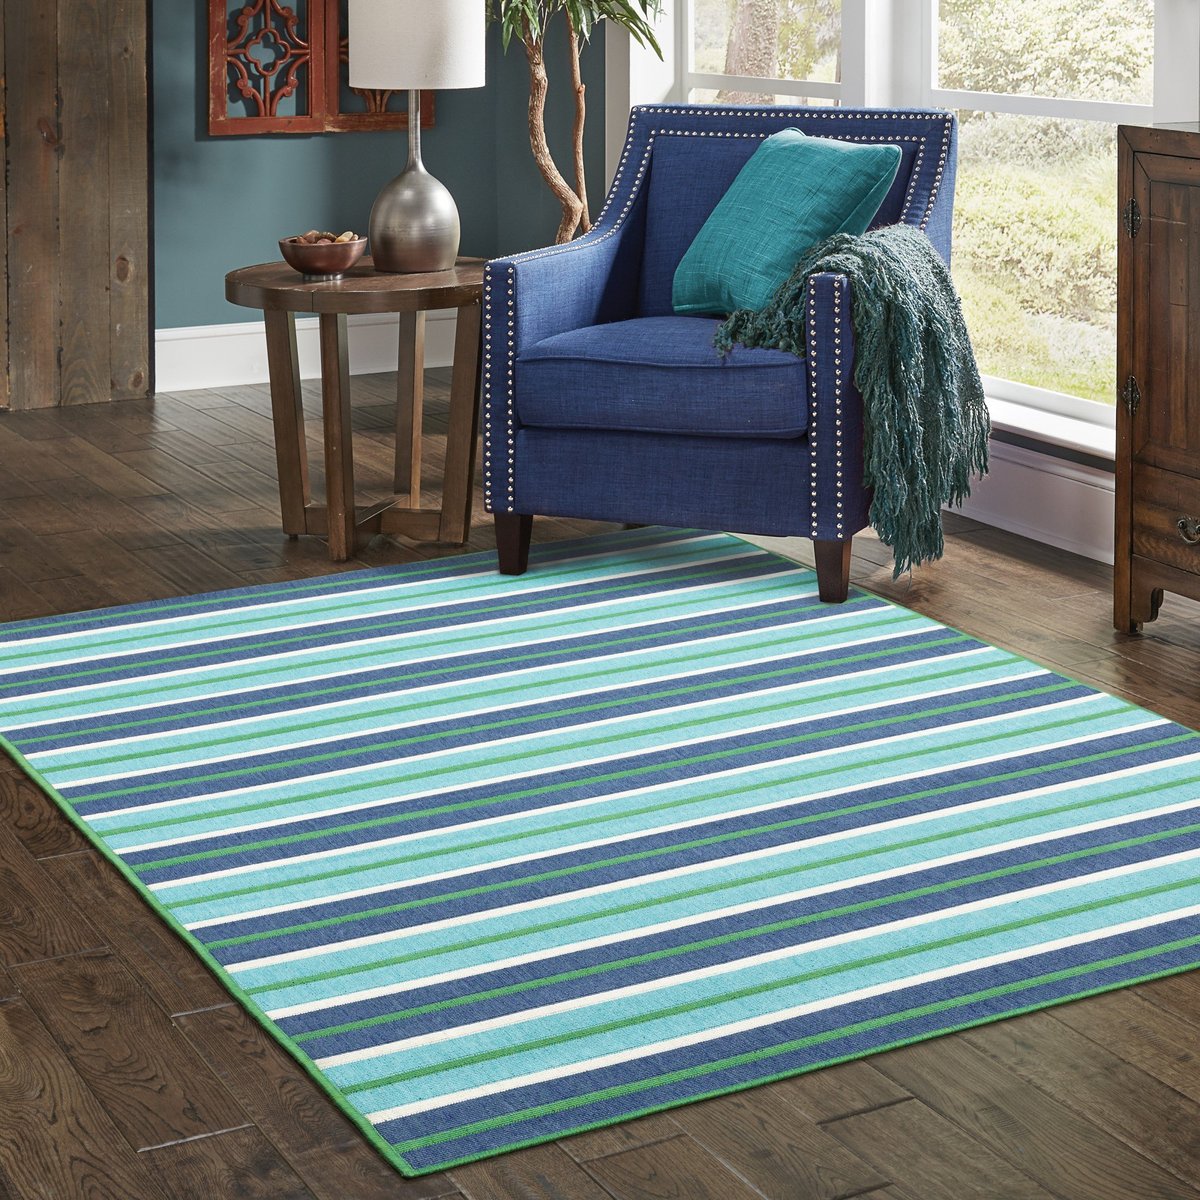 Oriental Weavers Meridian 9652f Rugs, Blue And Green Striped Outdoor Rug